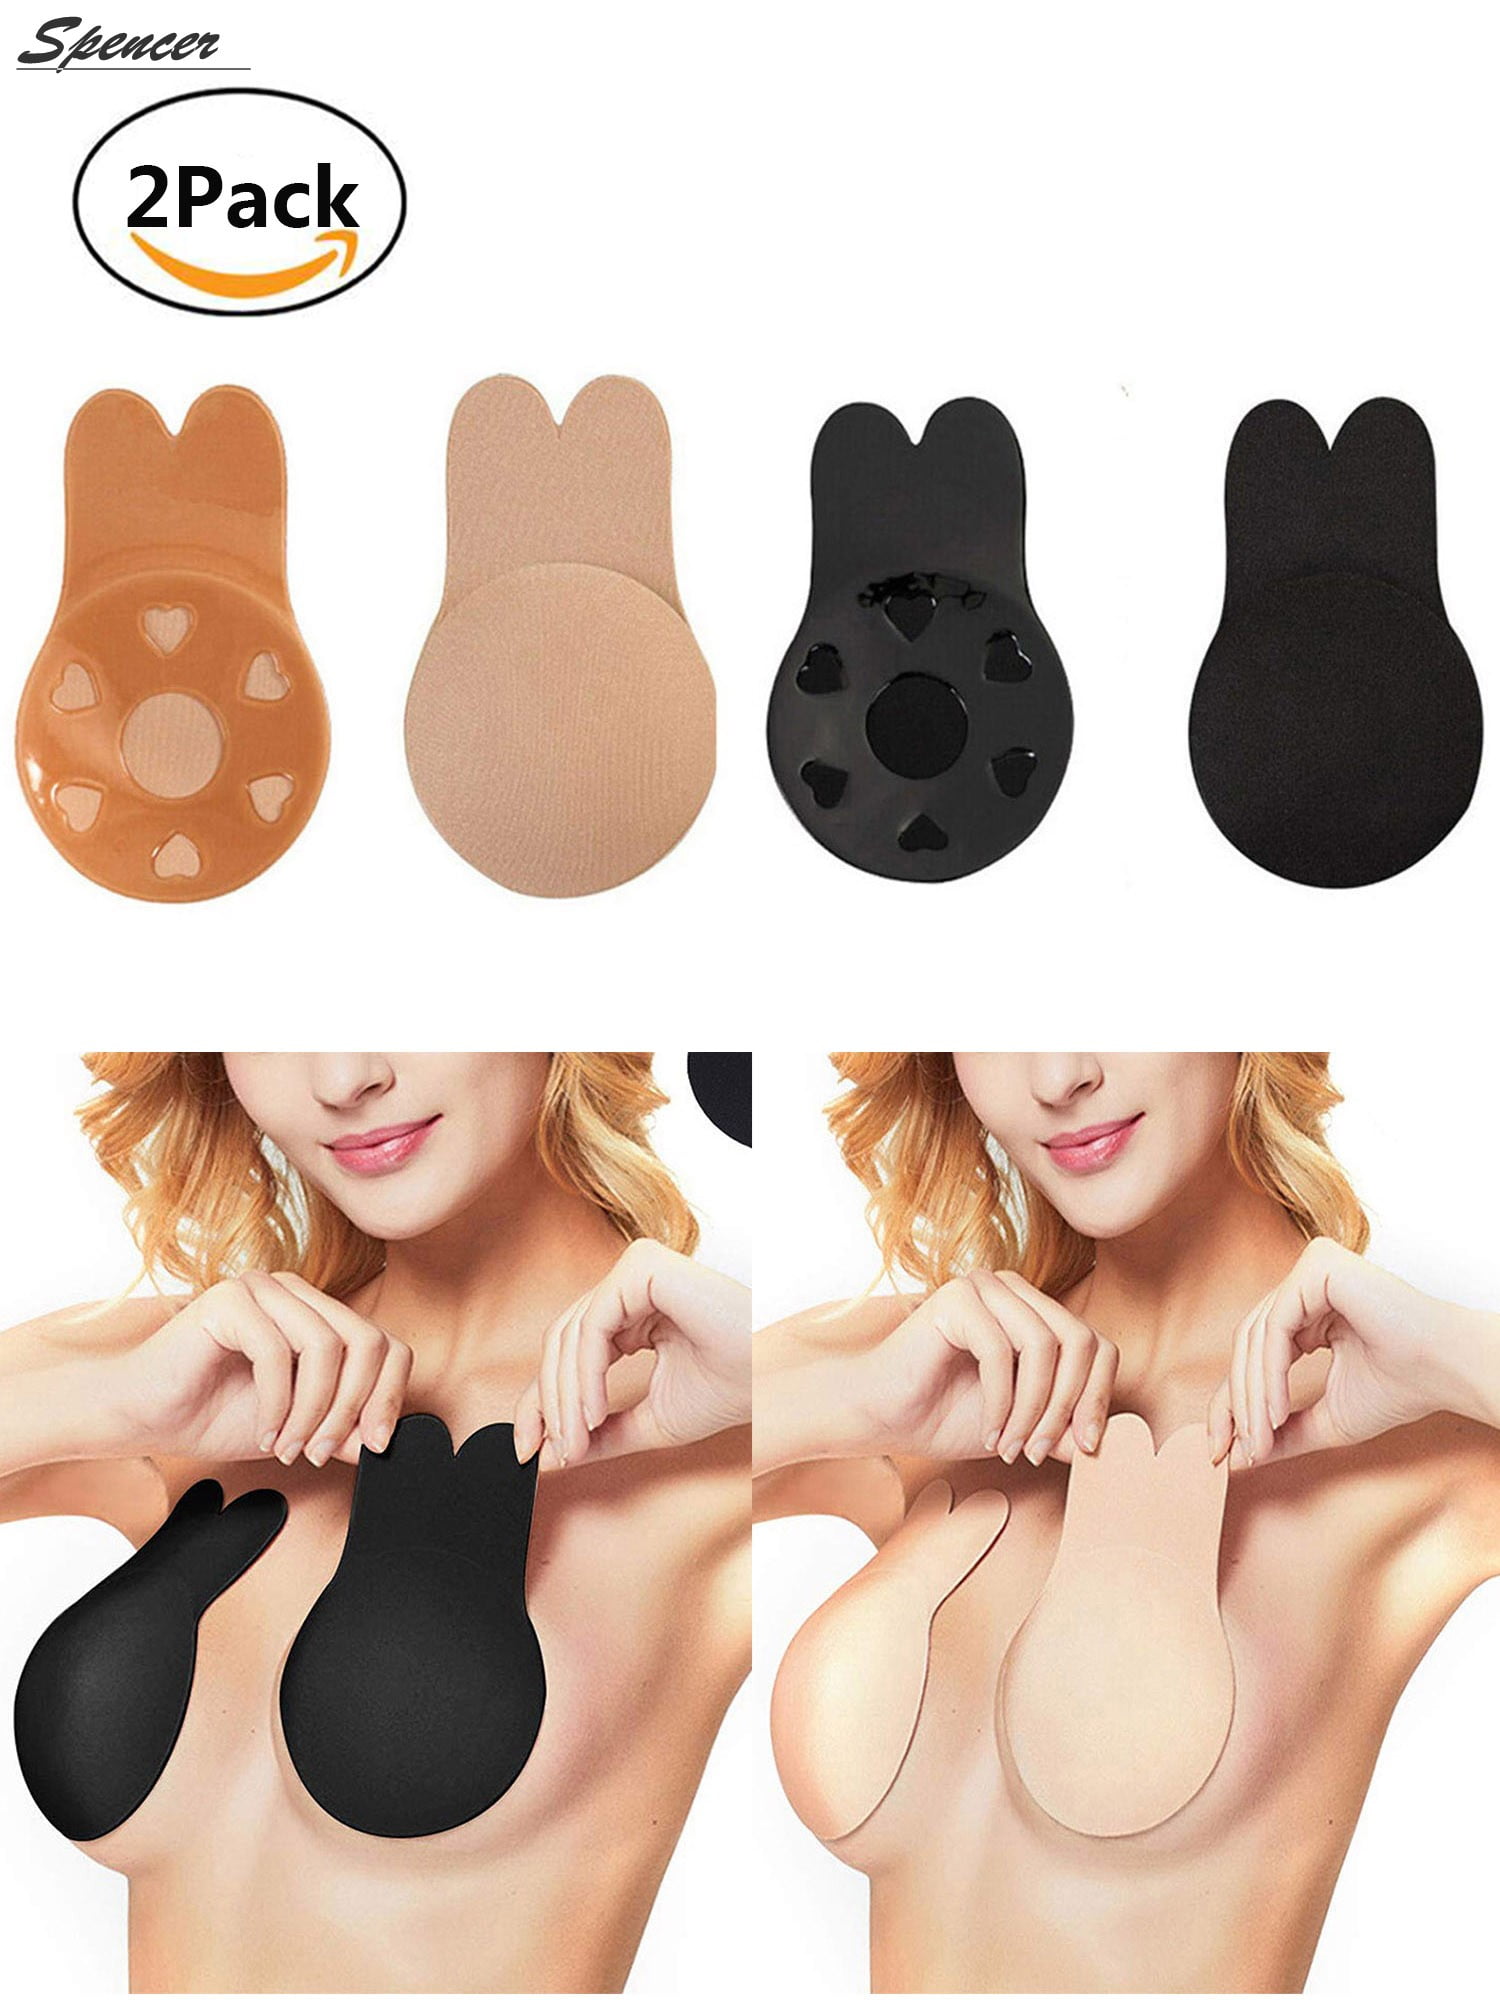 Spencer Women's Strapless Sticky Bra Self Adhesive Backless Push Up Bra  Reusable Invisible Silicone Bras Skin,B Cup 